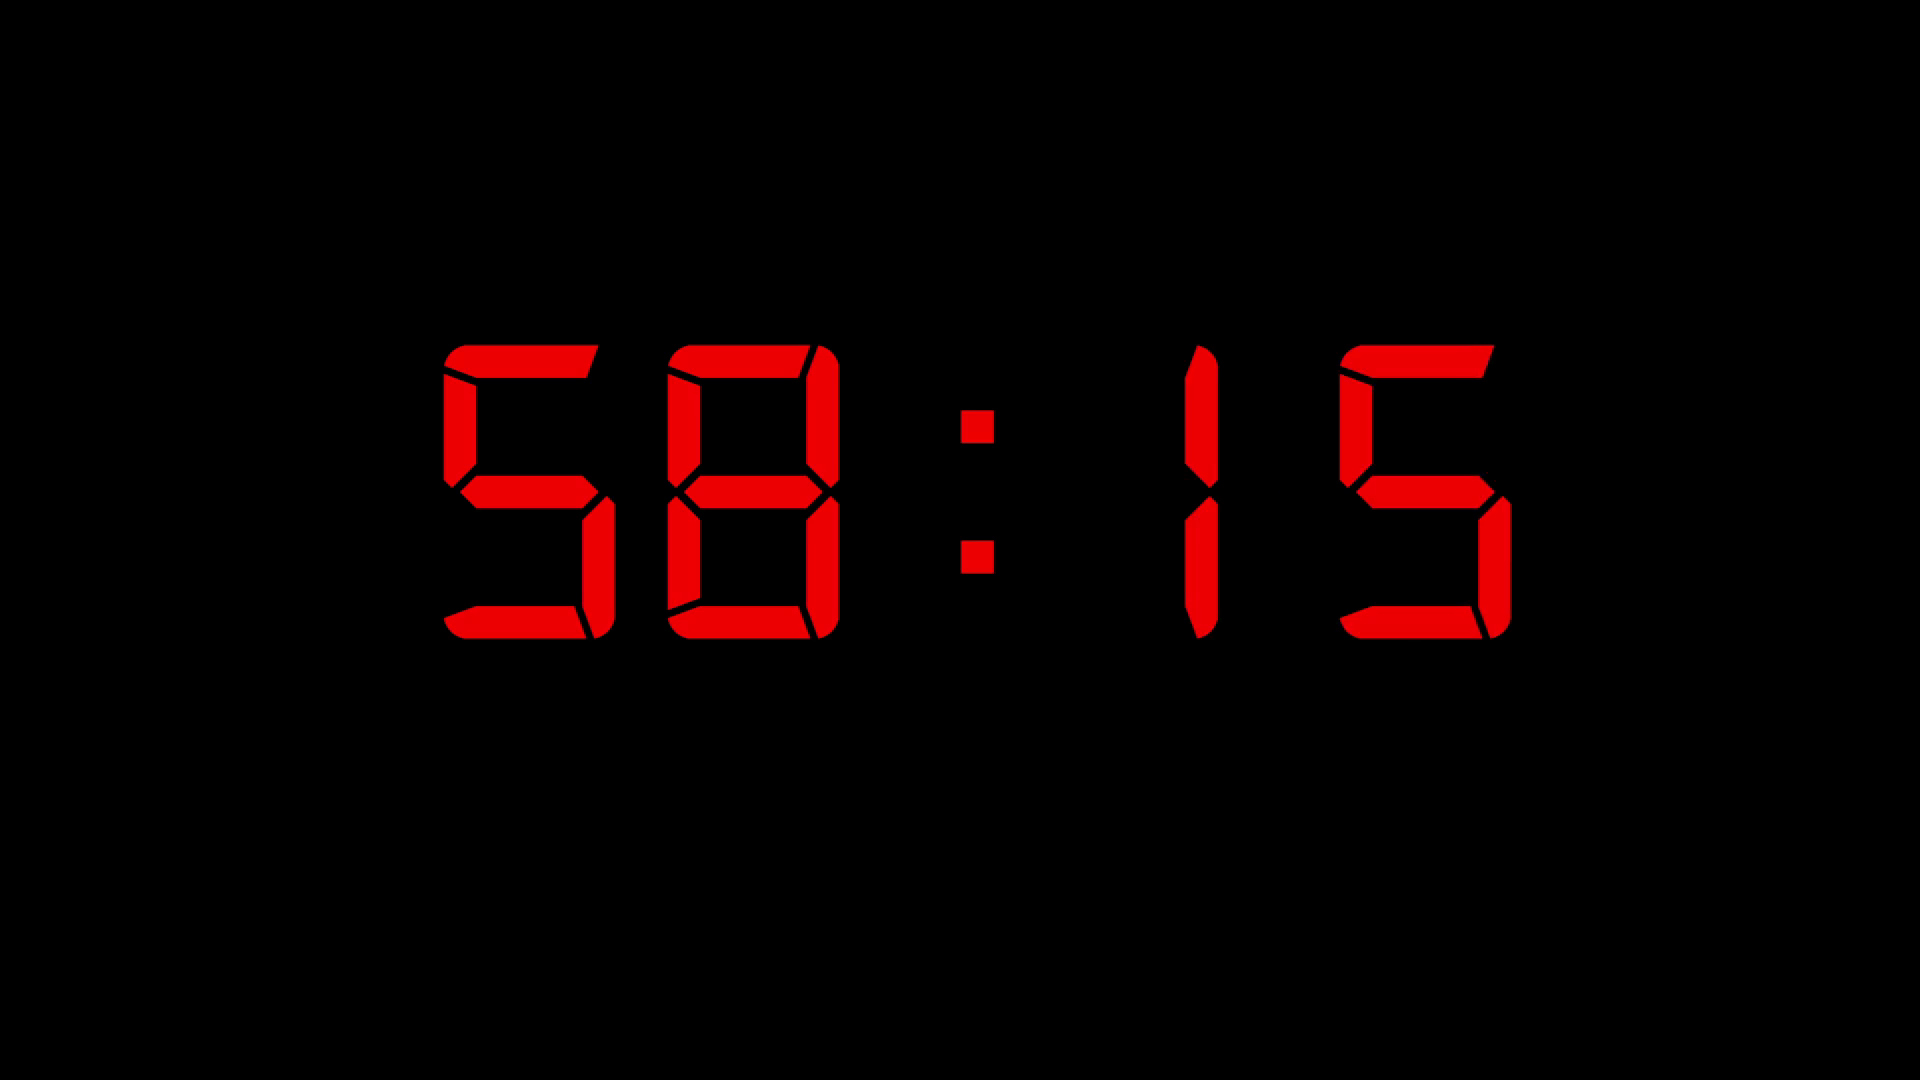 A Timer for 1 Minutes Best Of 1 Minute Countdown Timer Motion Background Videoblocks